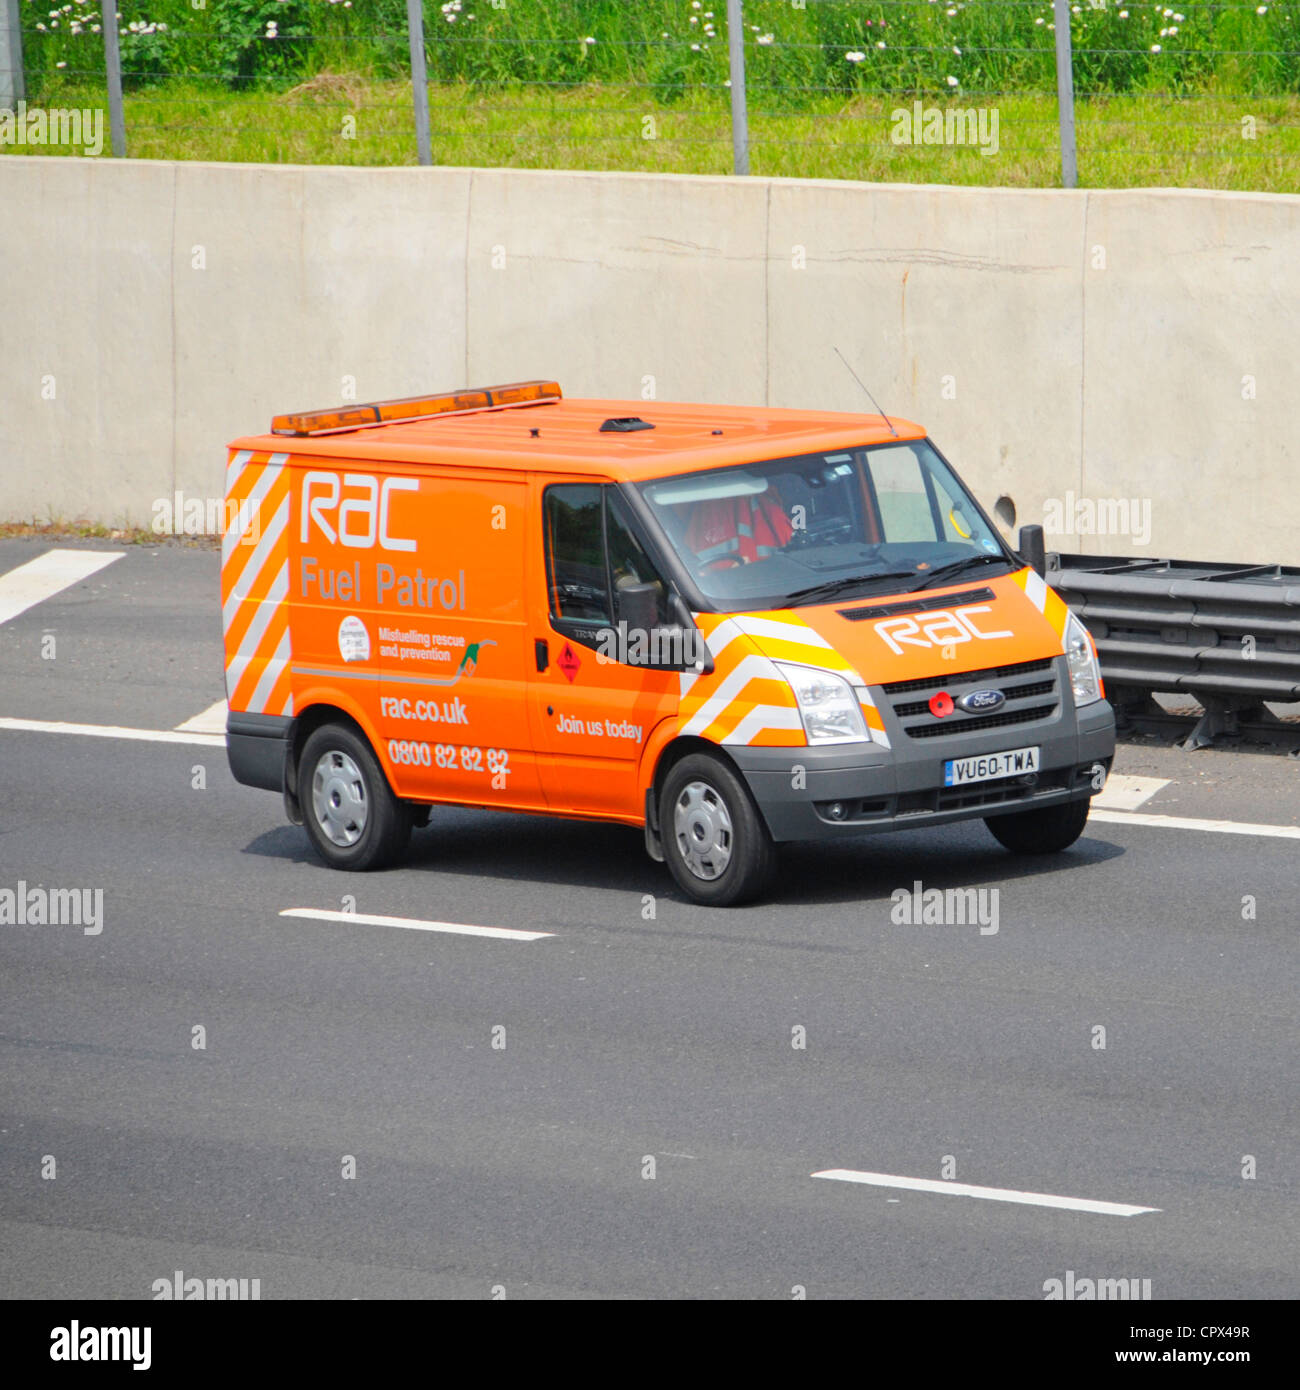 RAC Fuel Patrol van capable of dealing with misfuelling rescues and prevention Stock Photo